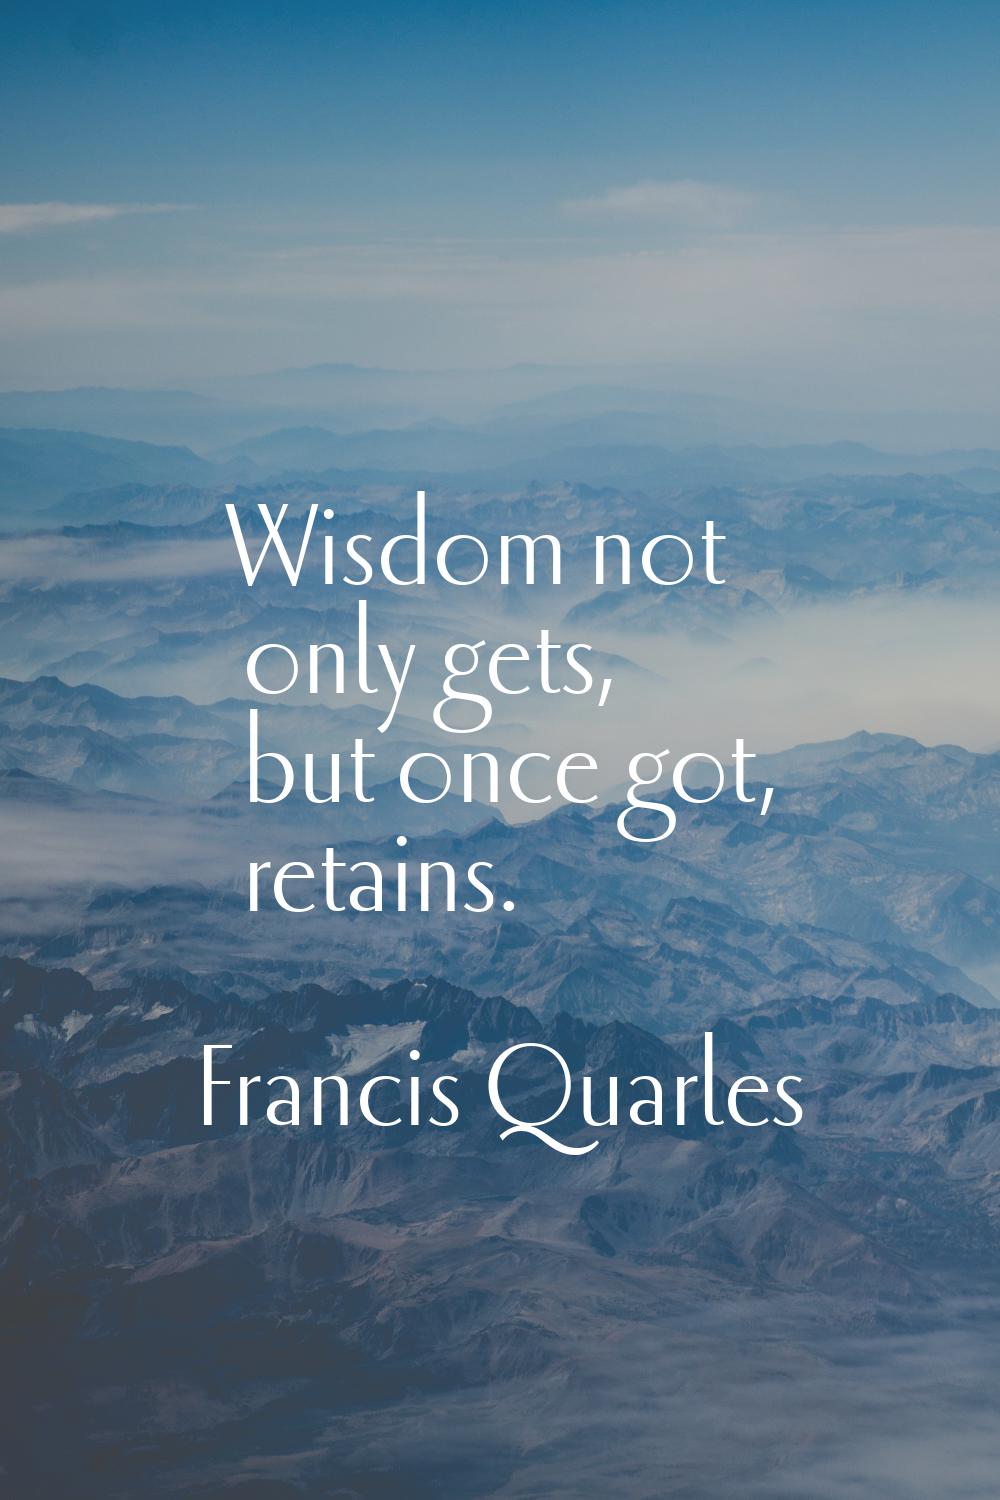 Wisdom not only gets, but once got, retains.